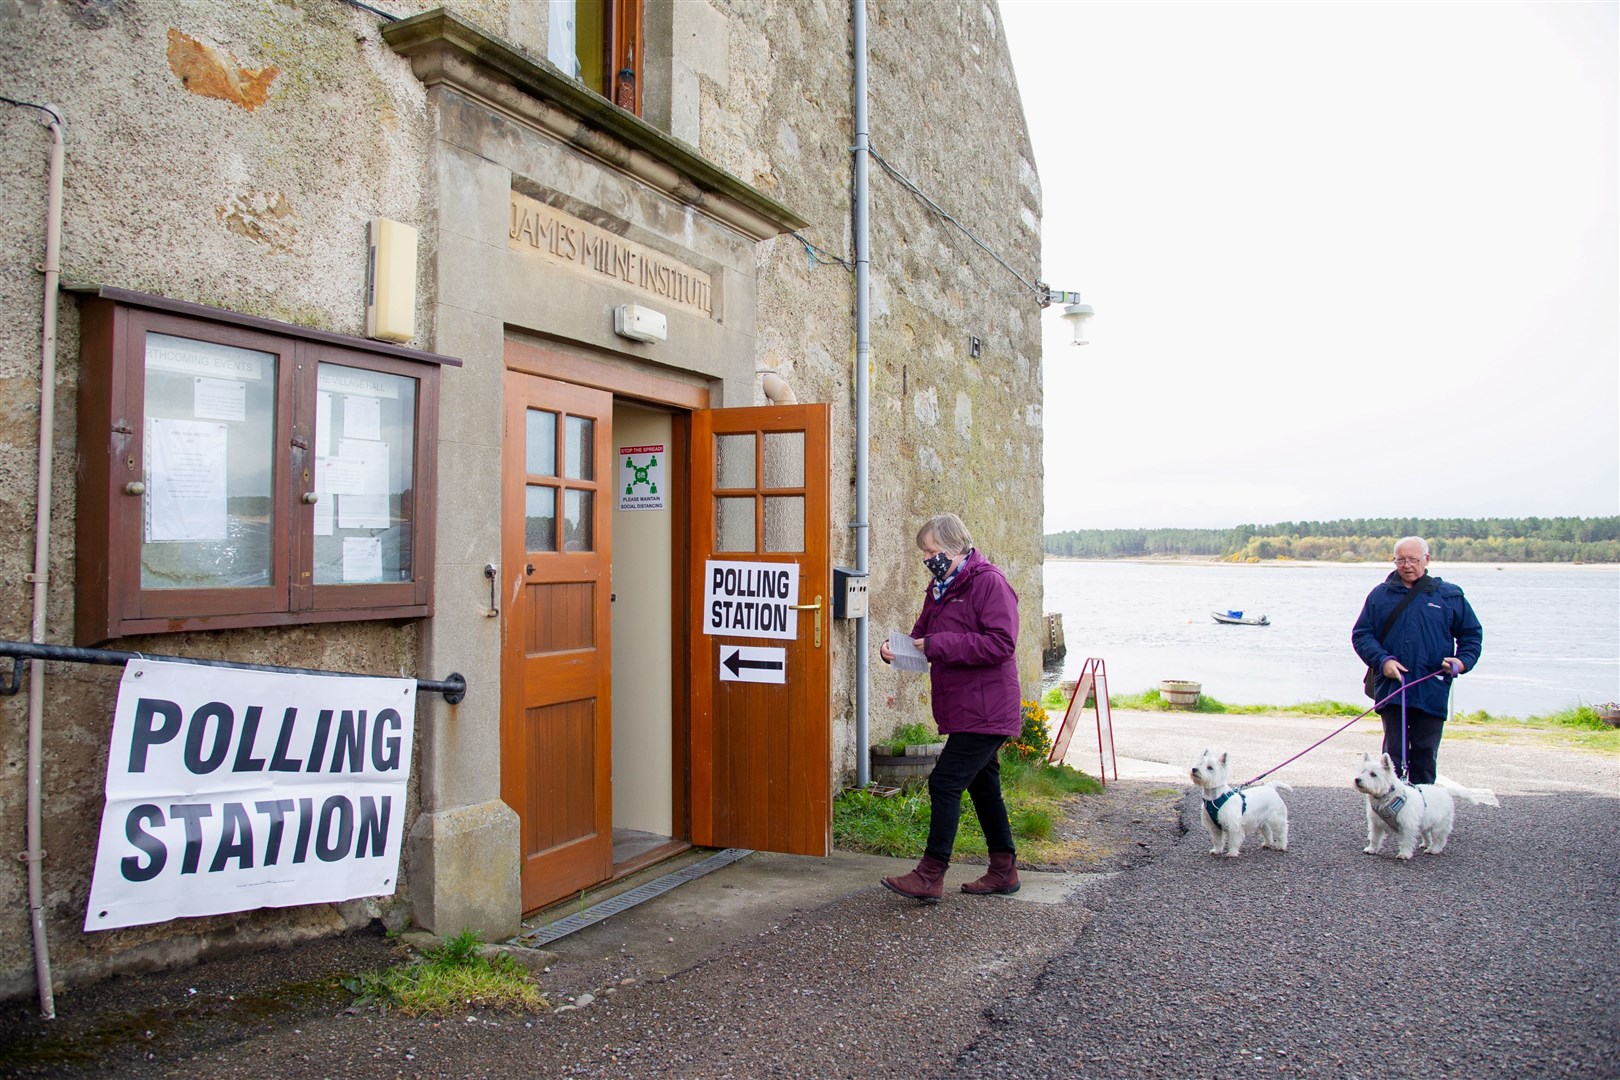 The James Milne Institute in Findhorn...Scottish Election Polling Day 2021...Picture: Daniel Forsyth.....